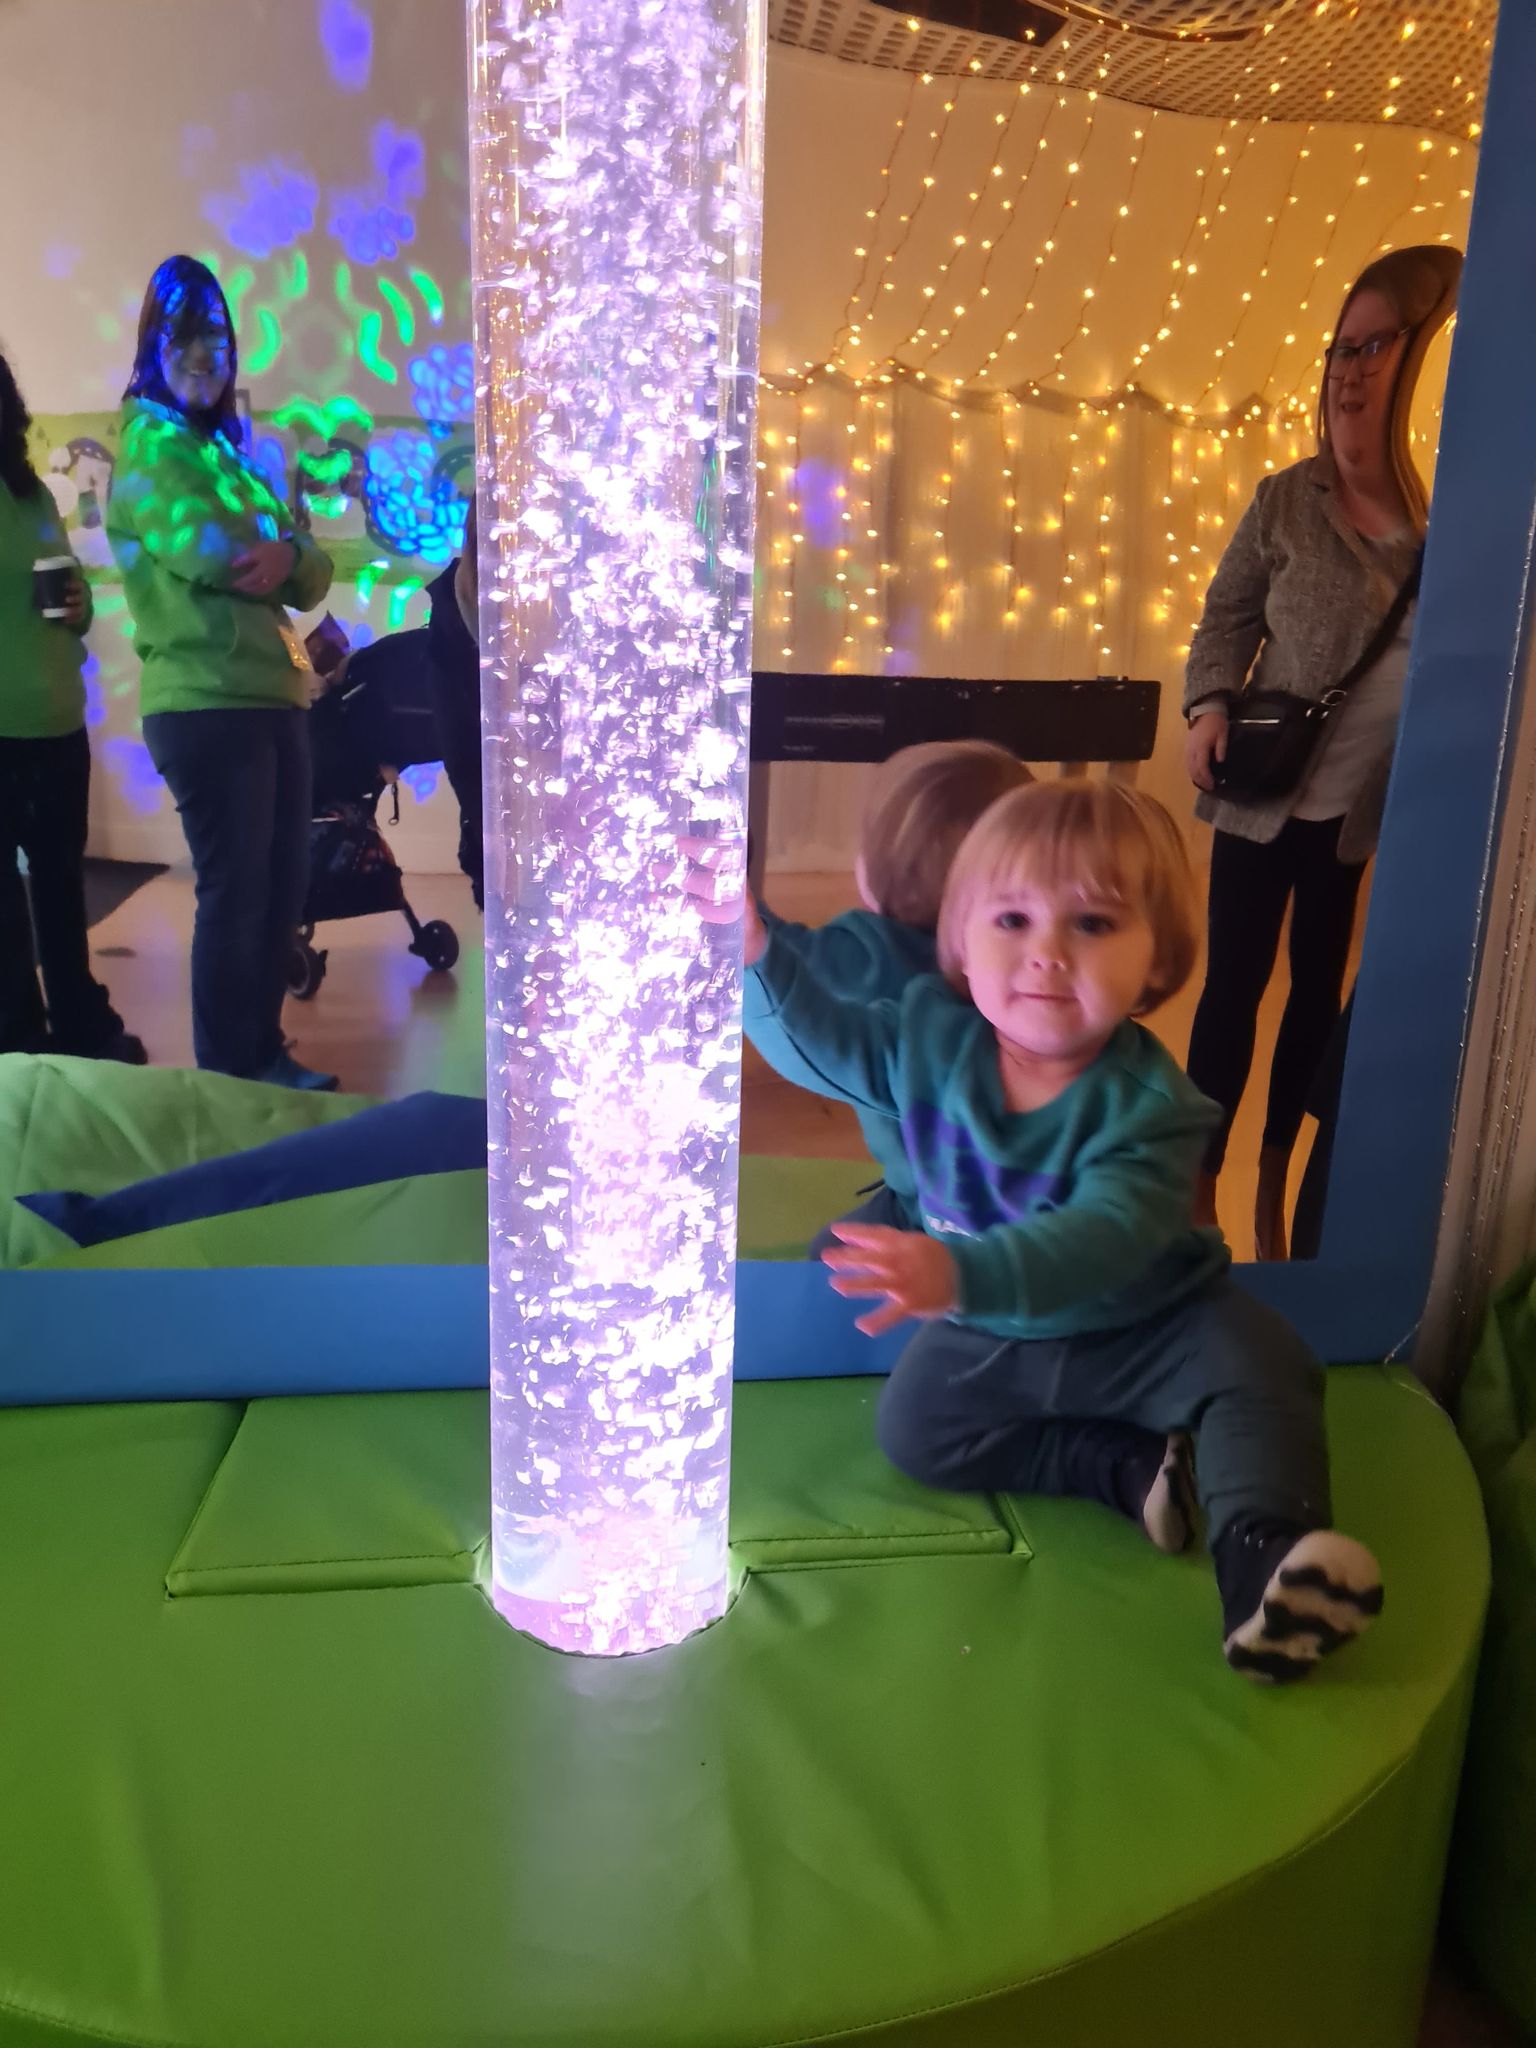 Child sitting on a raised green mat, looking at the camera, touching an illuminated pole.